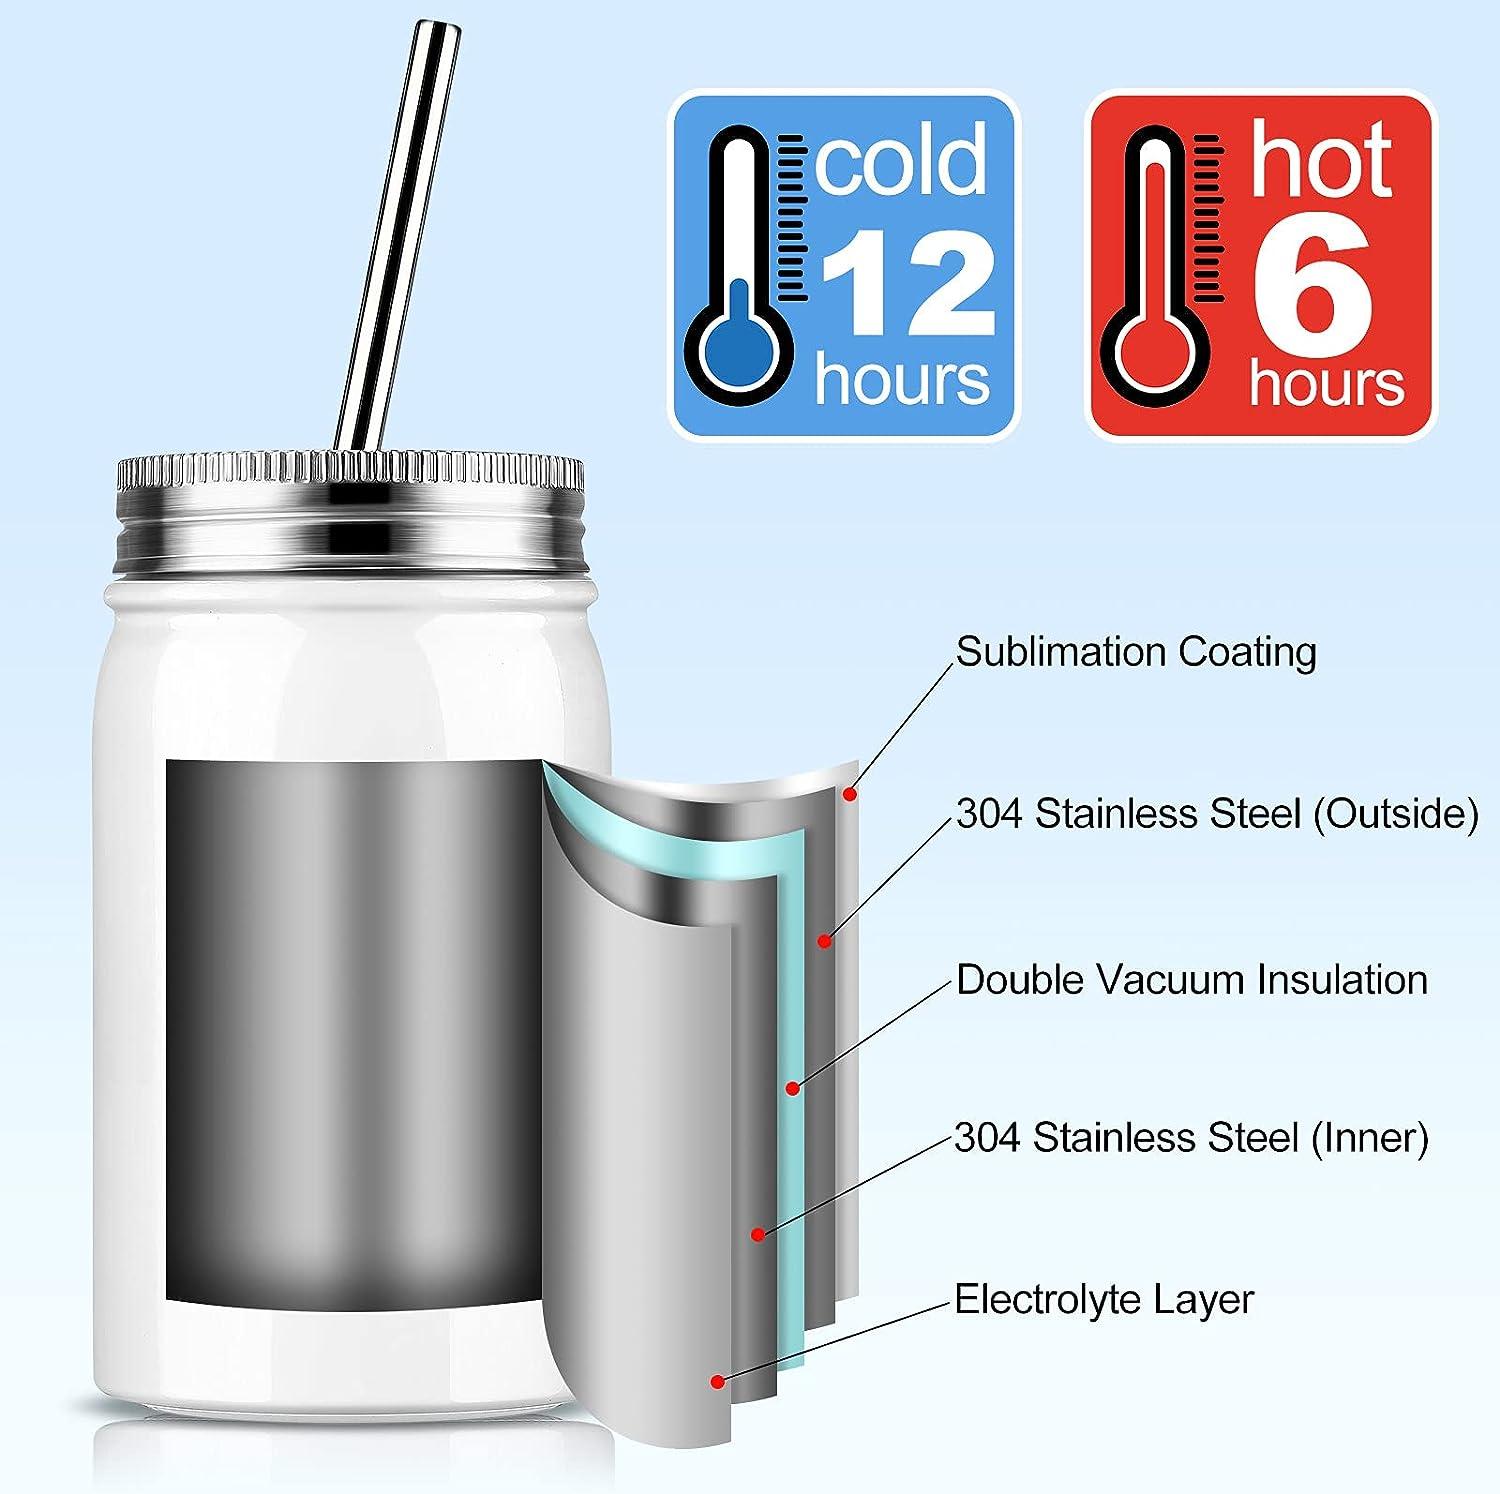 Tumblers Bulk 17oz Blanks Tumbler White Mason Skinny Straight Sublimation  Cups for Heat Transfer Stainless Steel Coffee Mugs with Lid and Straw DIY  Heat Press Printing(6 Pieces)